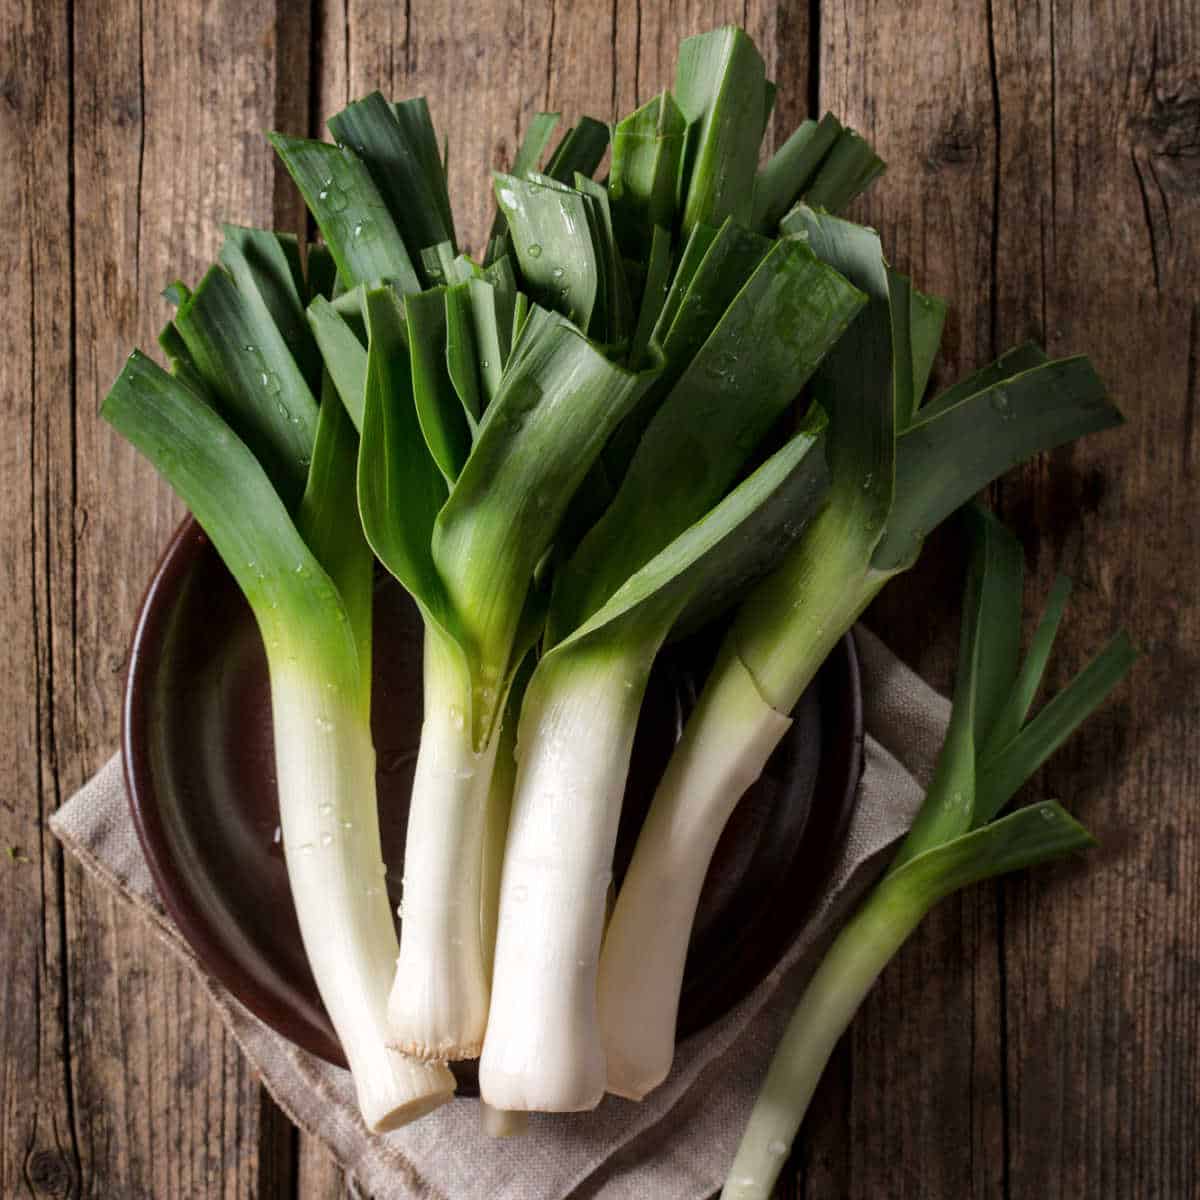 Leeks on a wooden table.